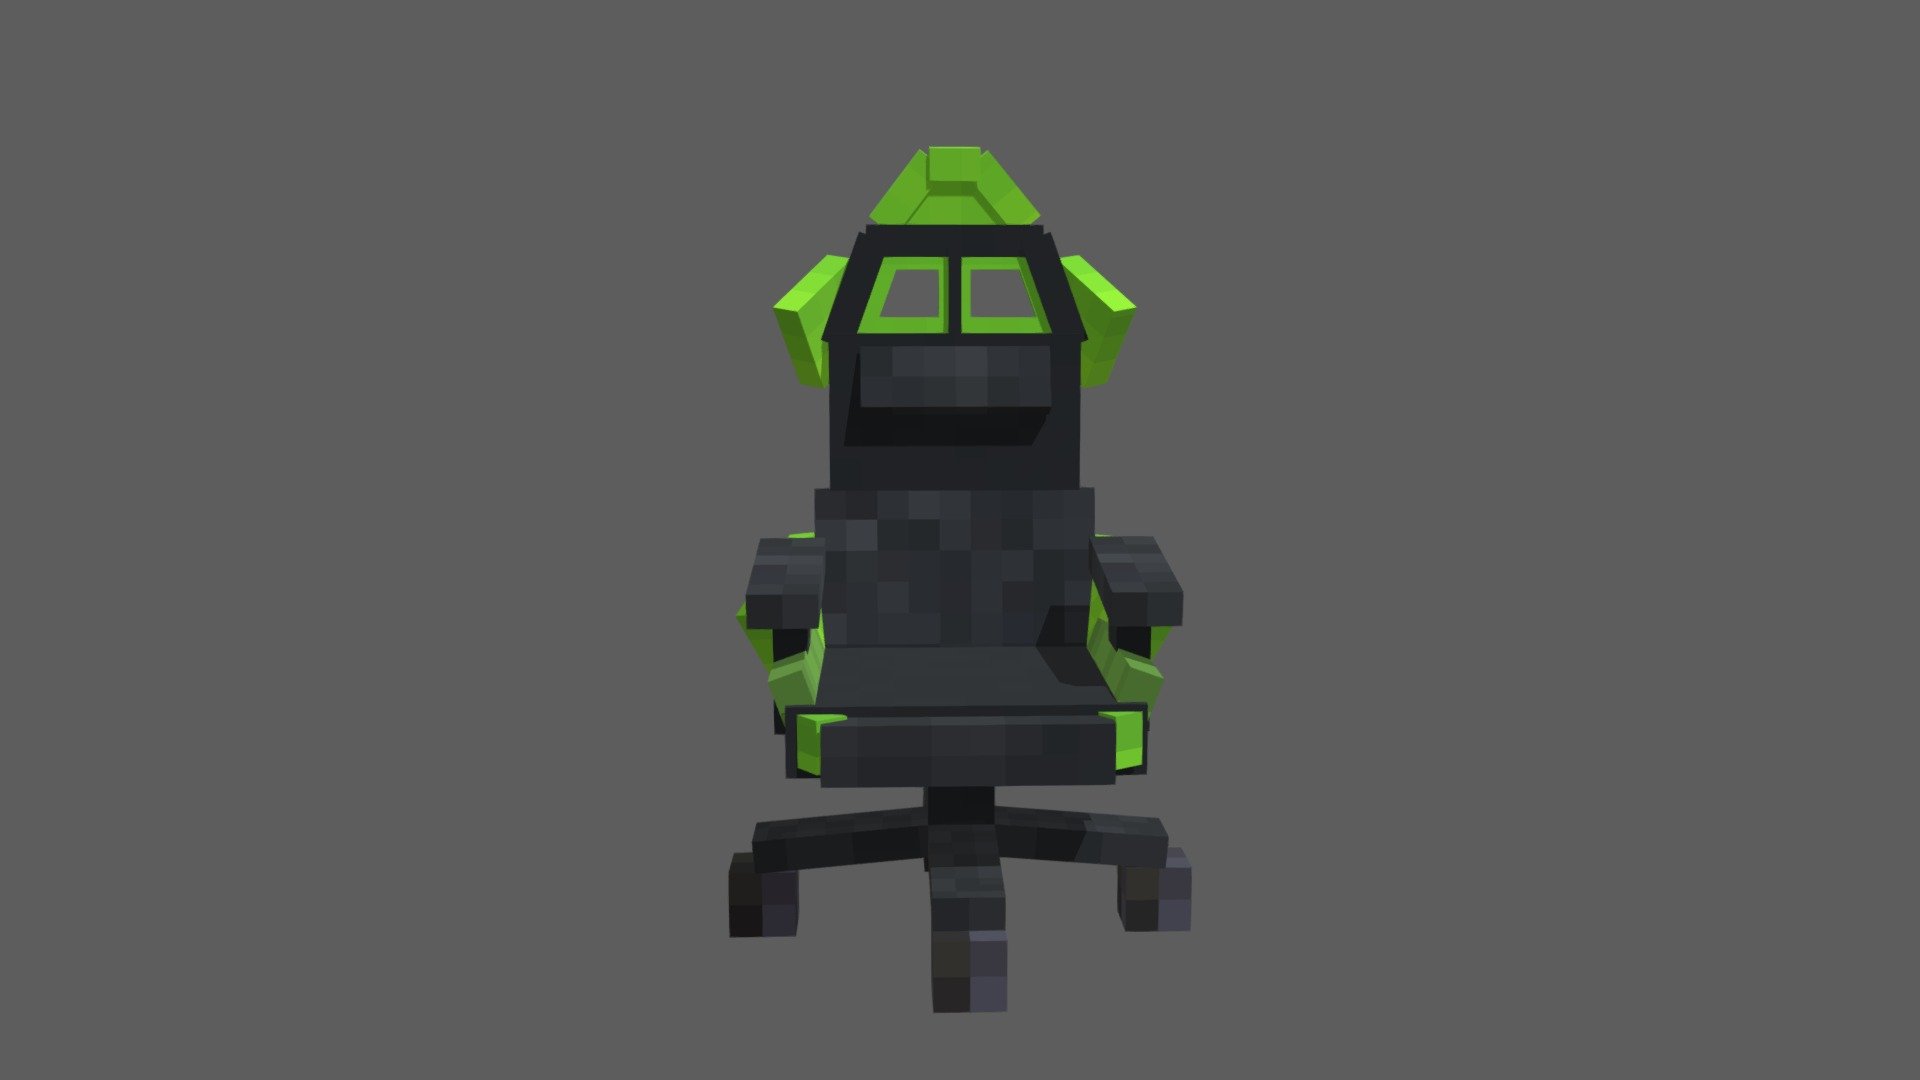 Minecraft gaming chair - Chair in minecraft - 3D model by Vov4k (@Vov4kMos) 3d model